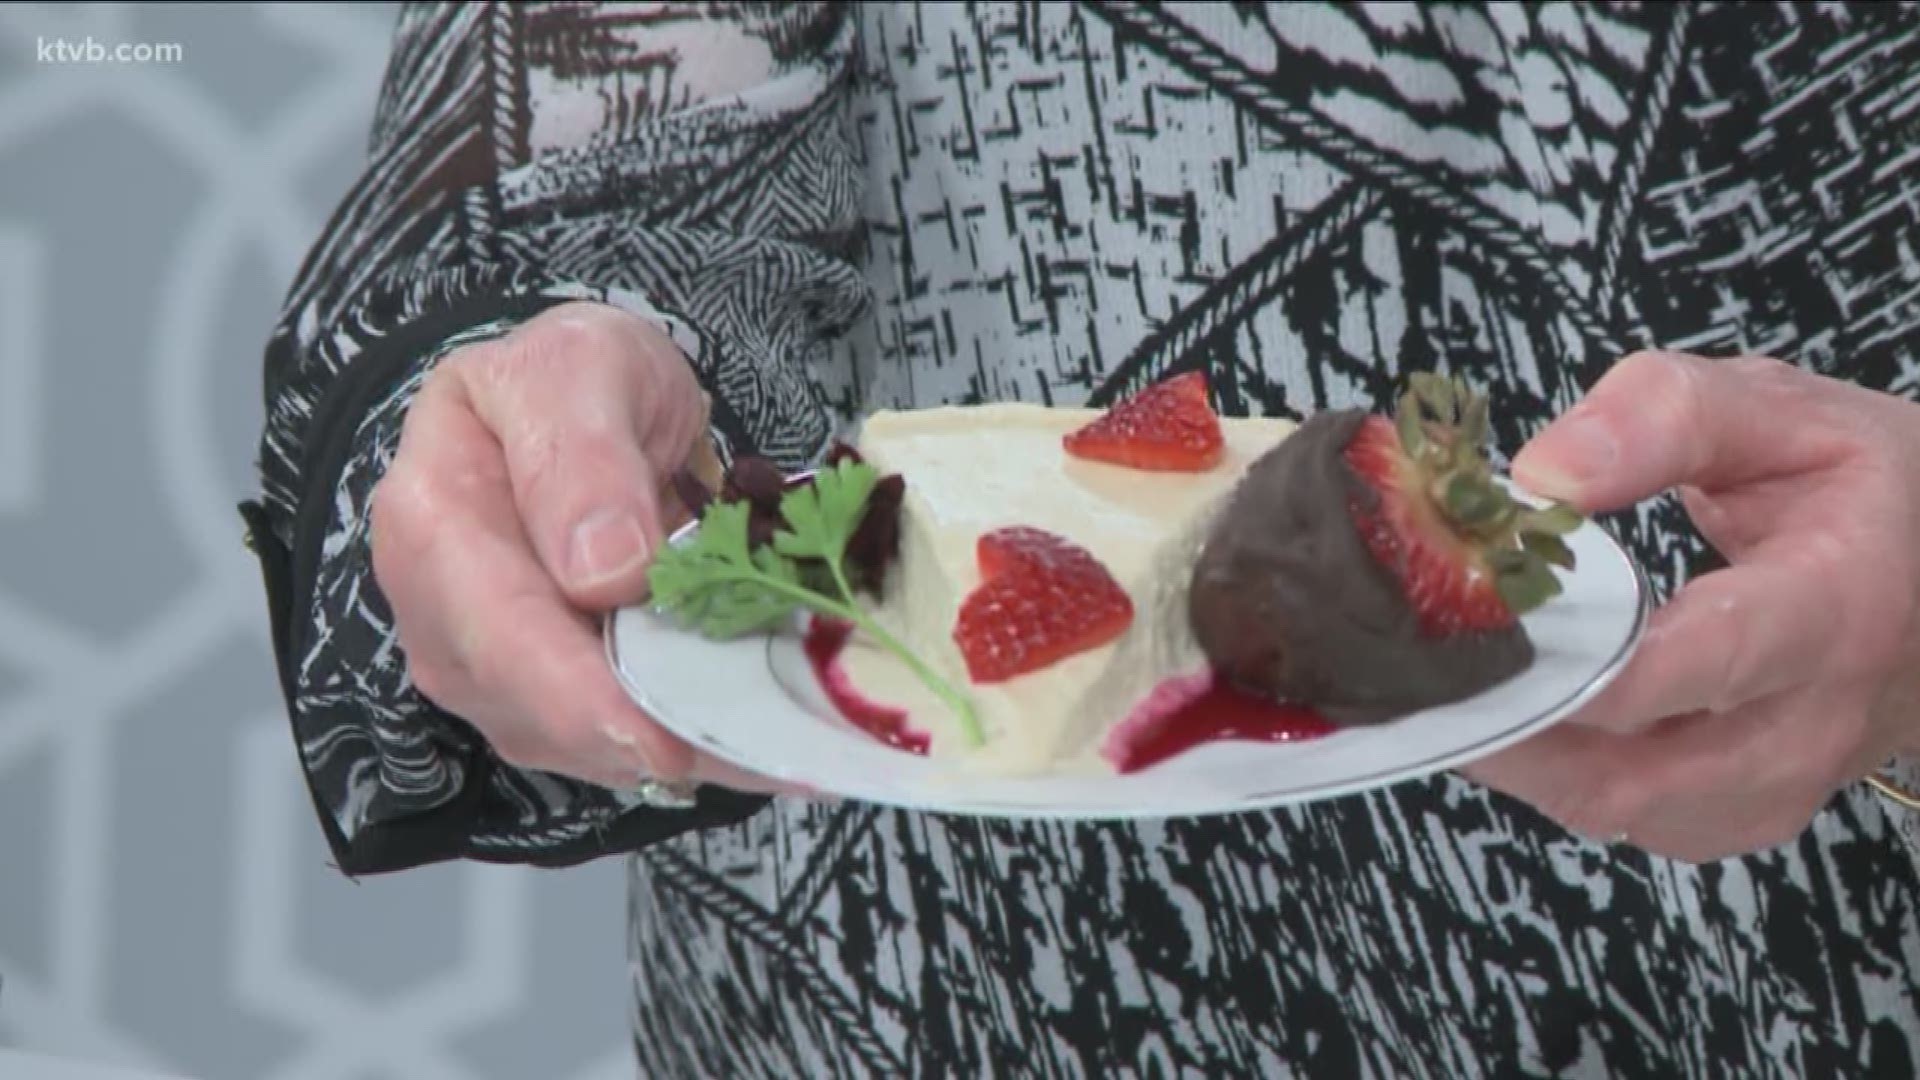 Chef Shel Leigh shows us how to make this delicious, healthy cheesecake.